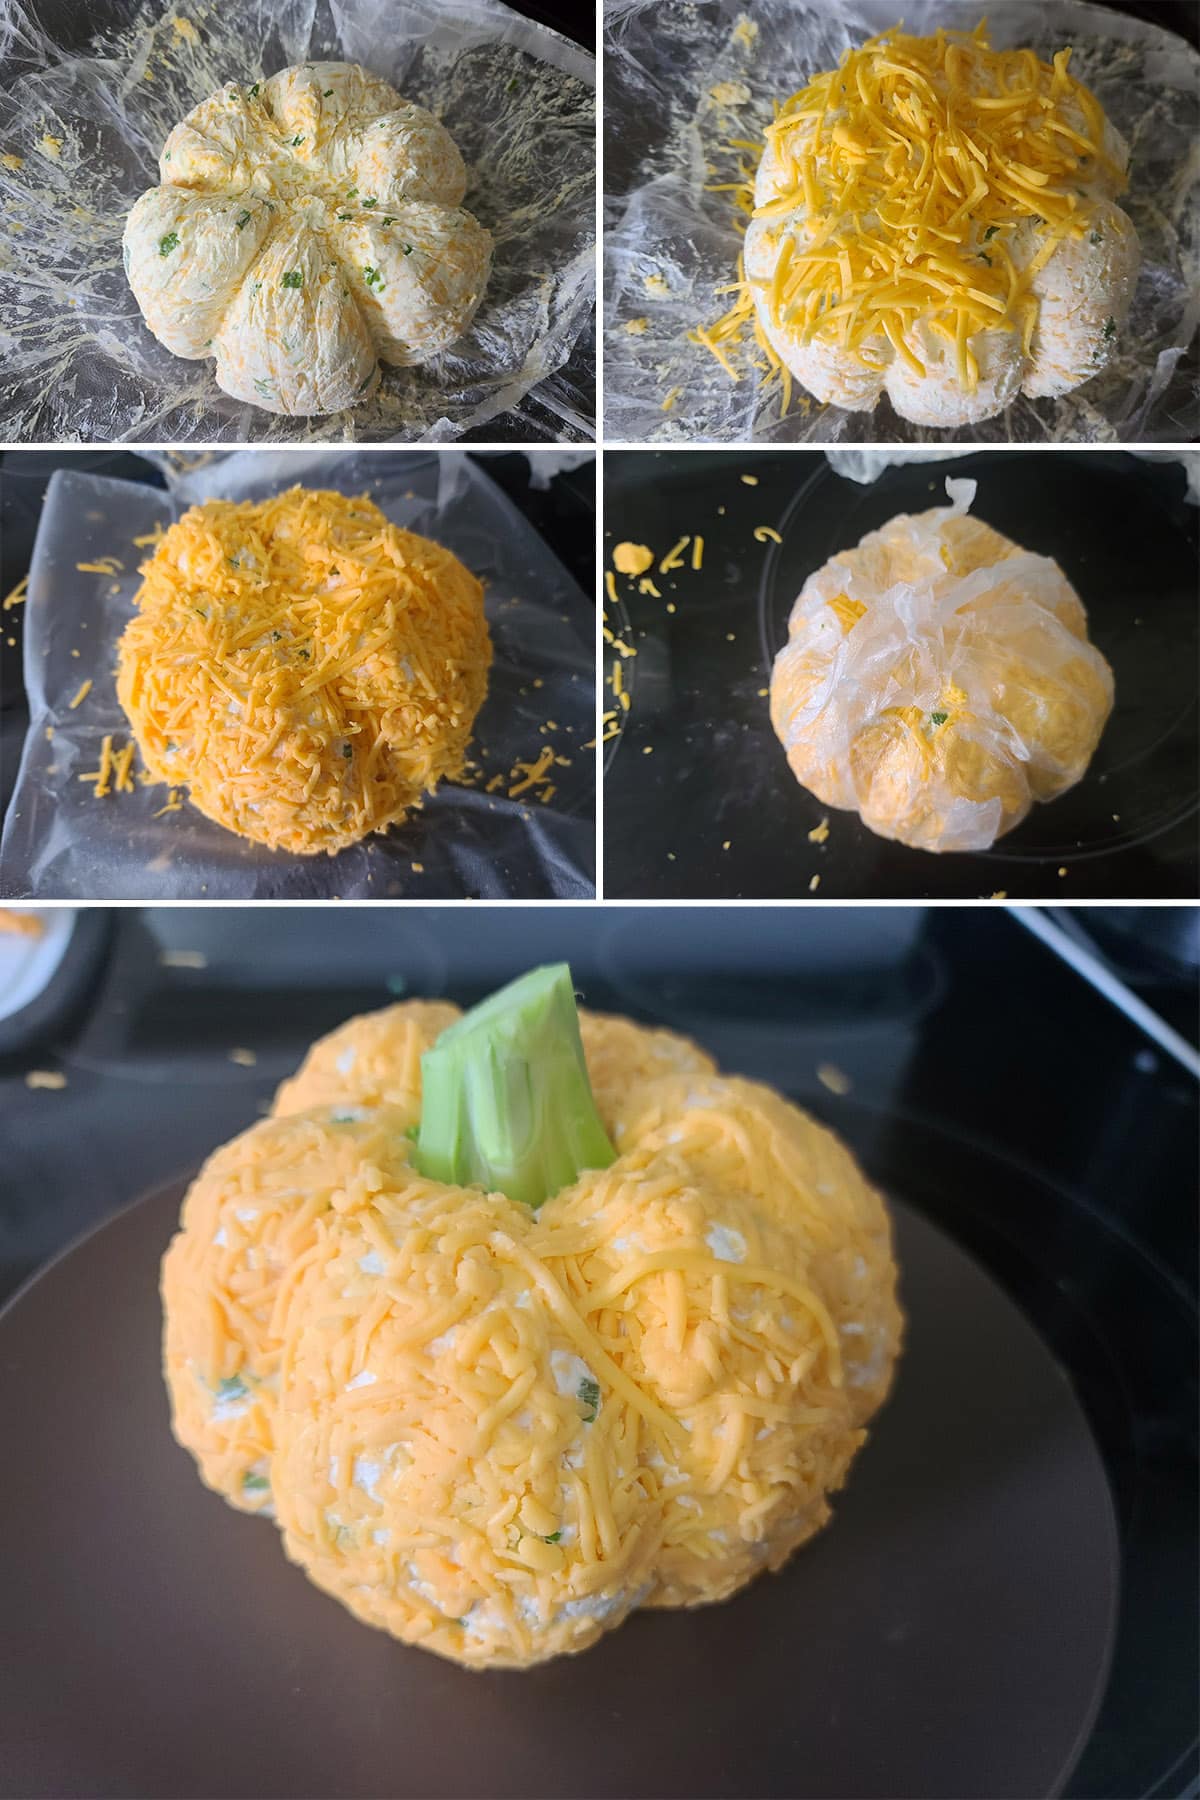 A 5 part image showing the formed cheese ball being coated in shredded cheese and the stem attached.